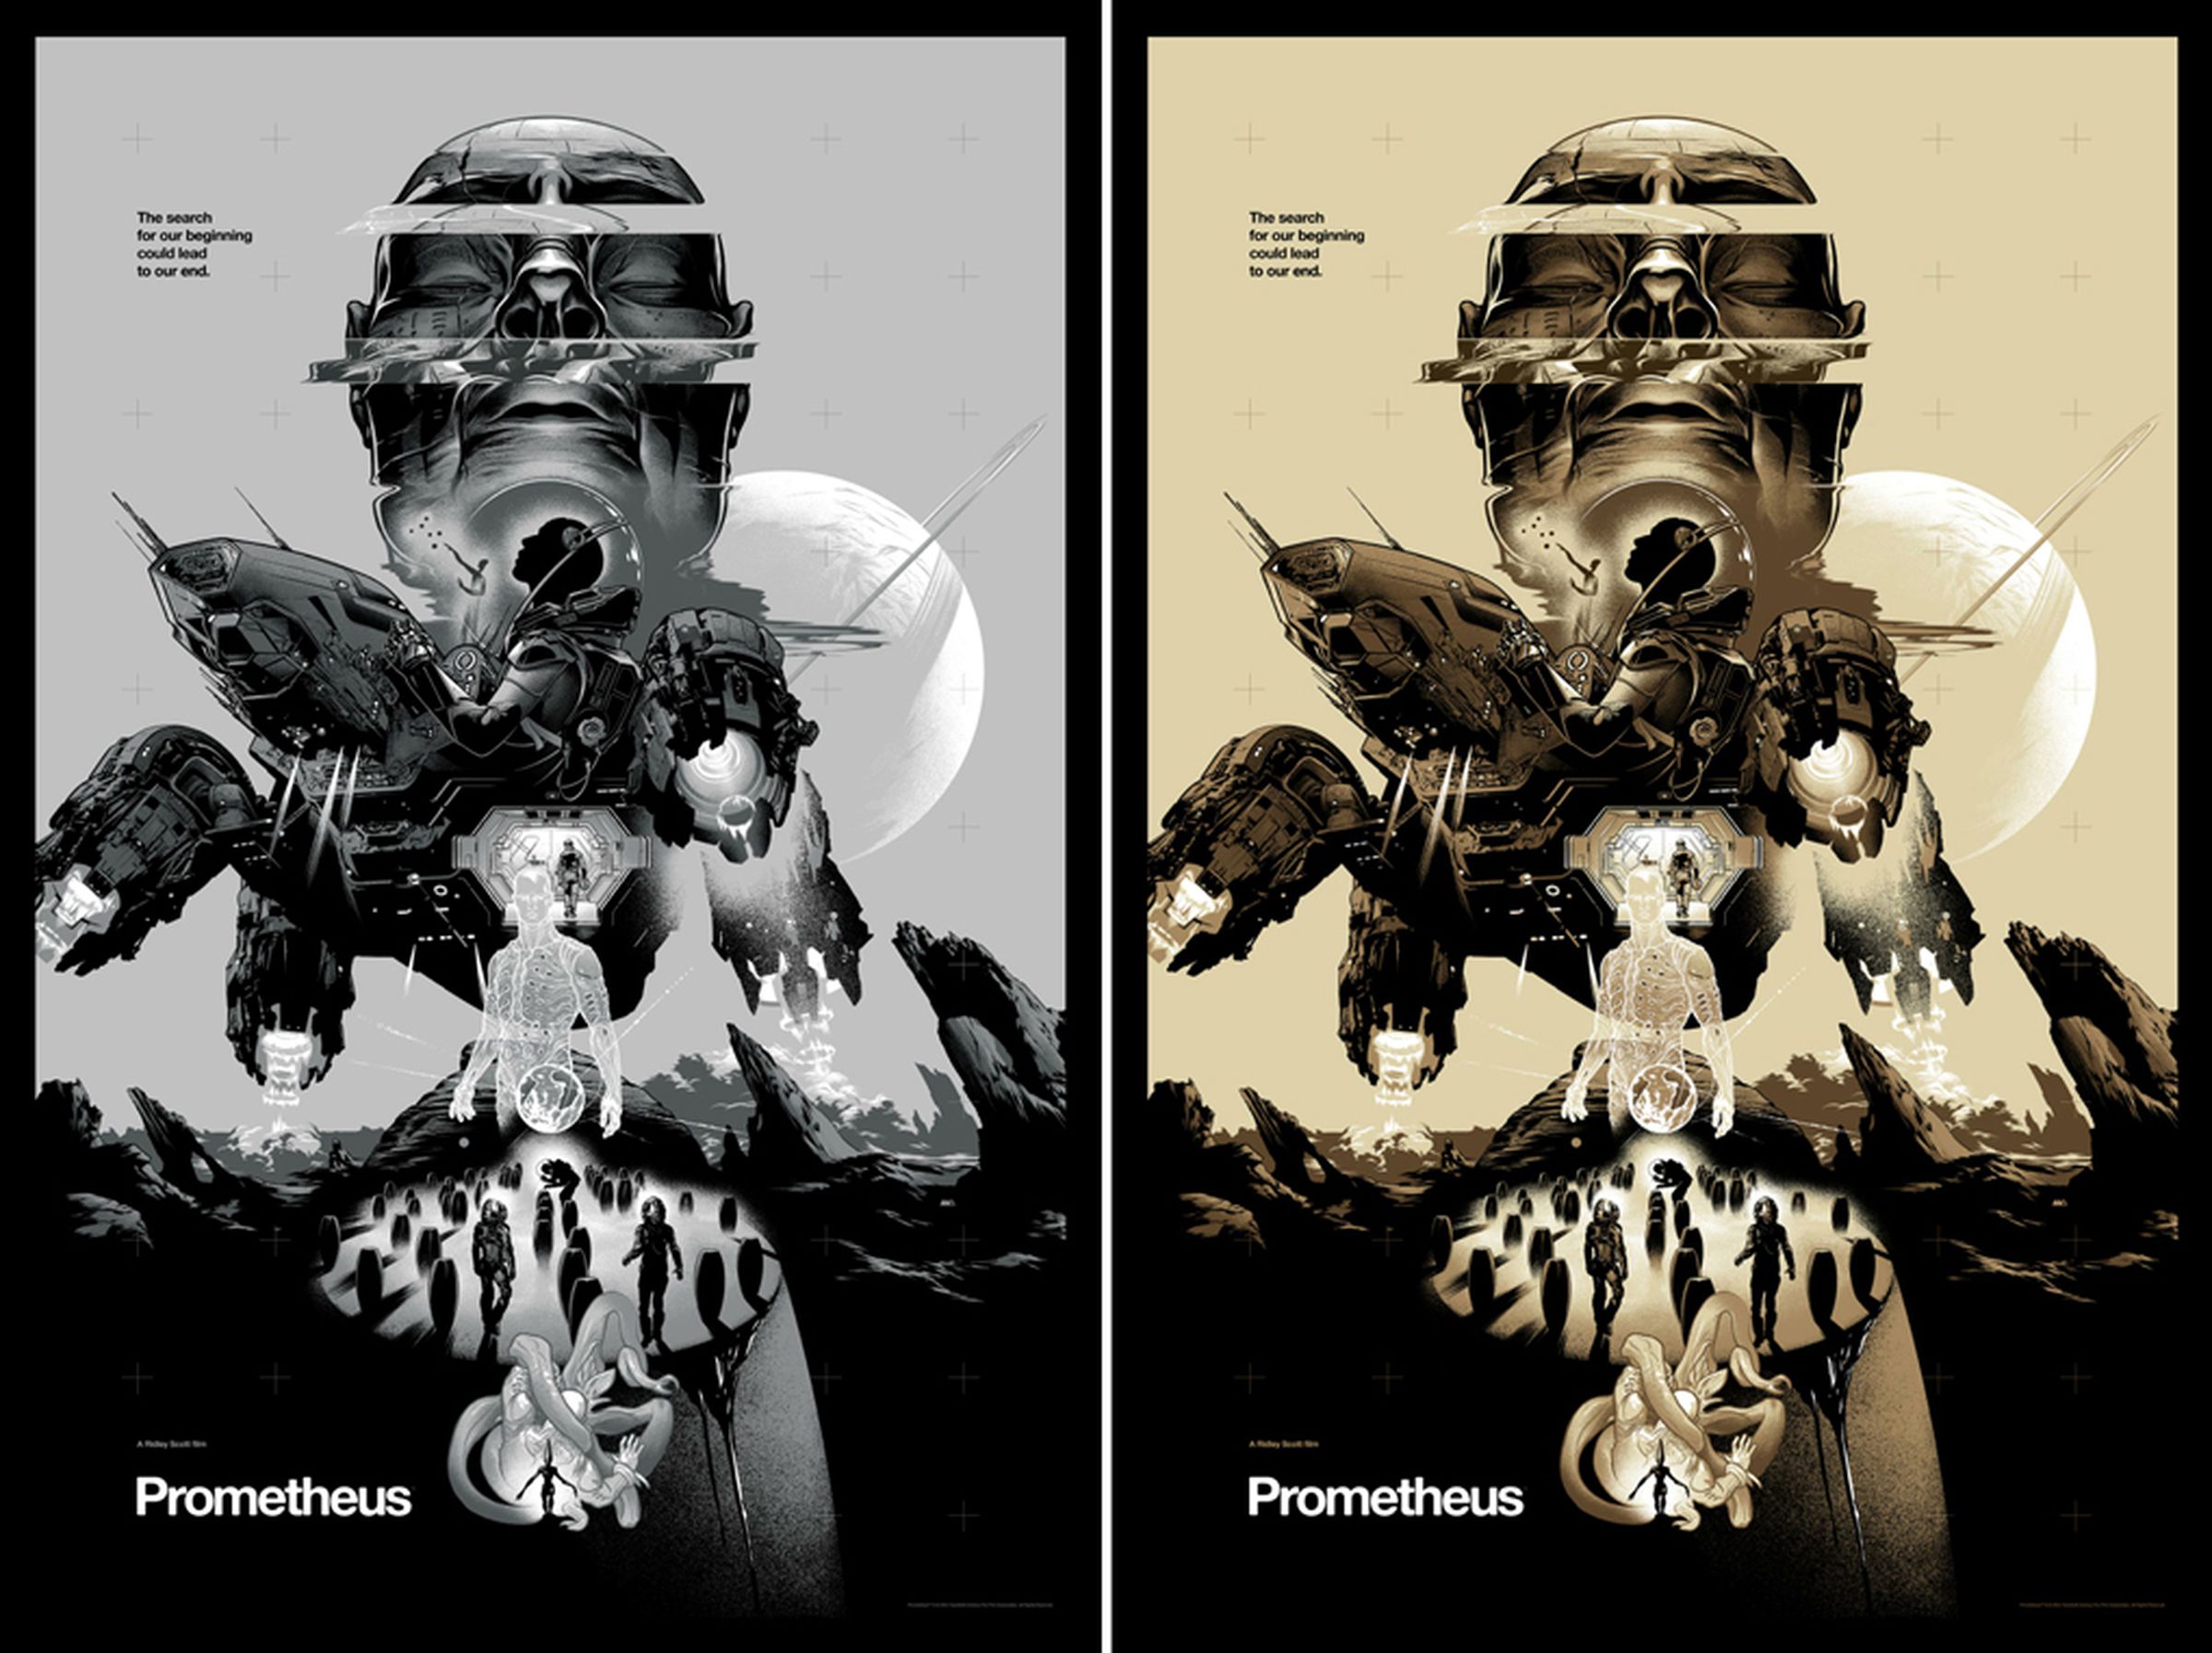 Mondo sci-fi movie poster exhibit with Kevin Tong and Martin Ansin